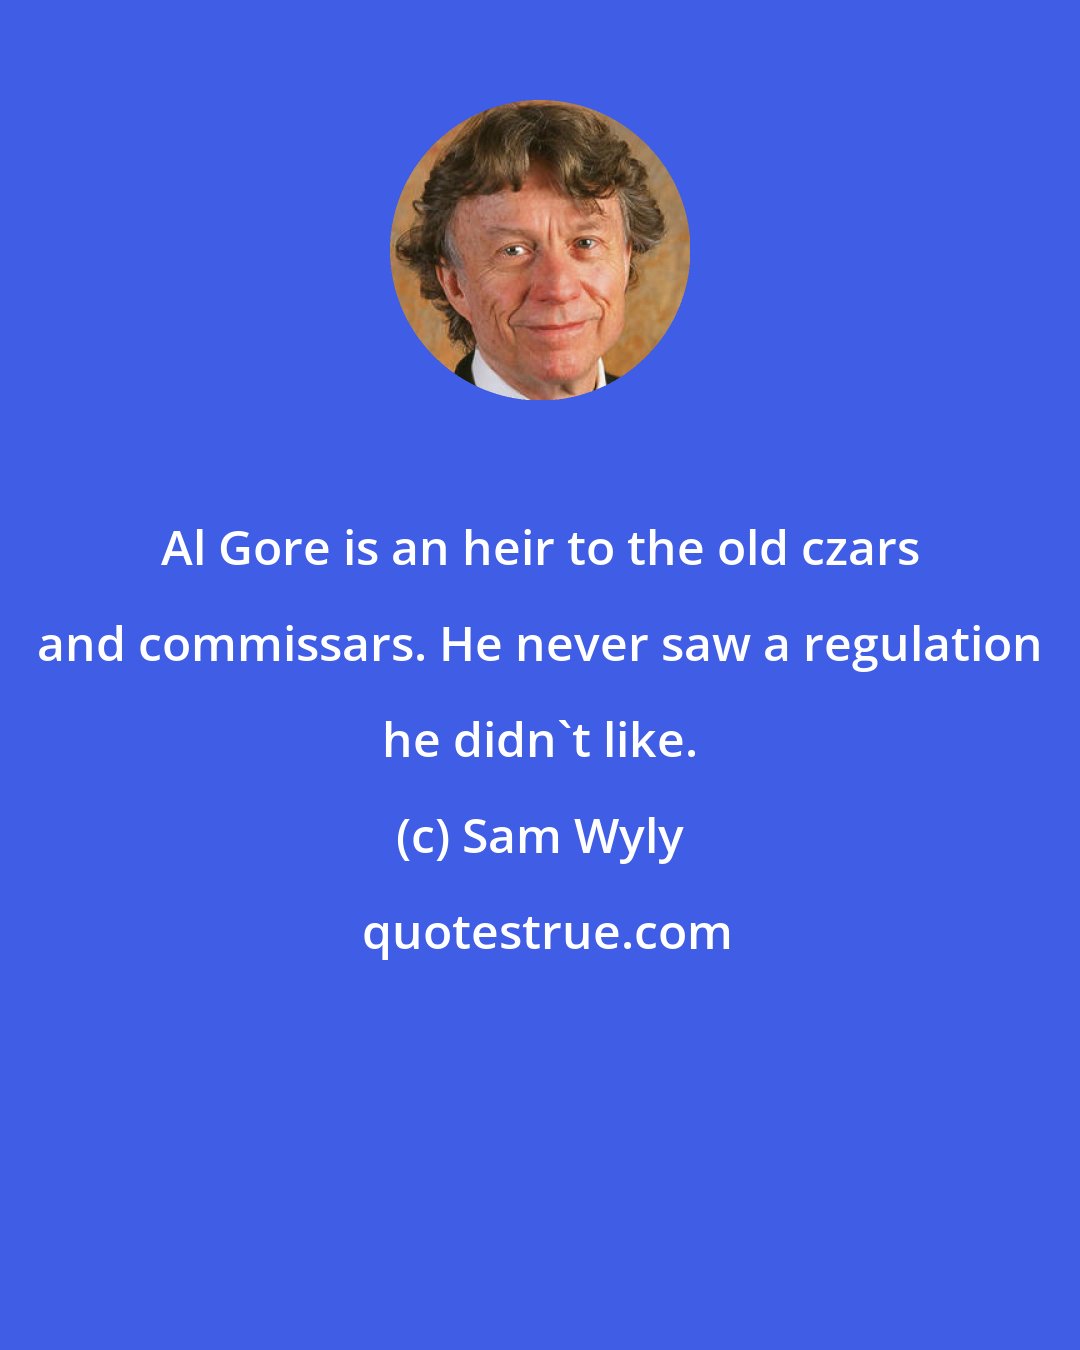 Sam Wyly: Al Gore is an heir to the old czars and commissars. He never saw a regulation he didn't like.